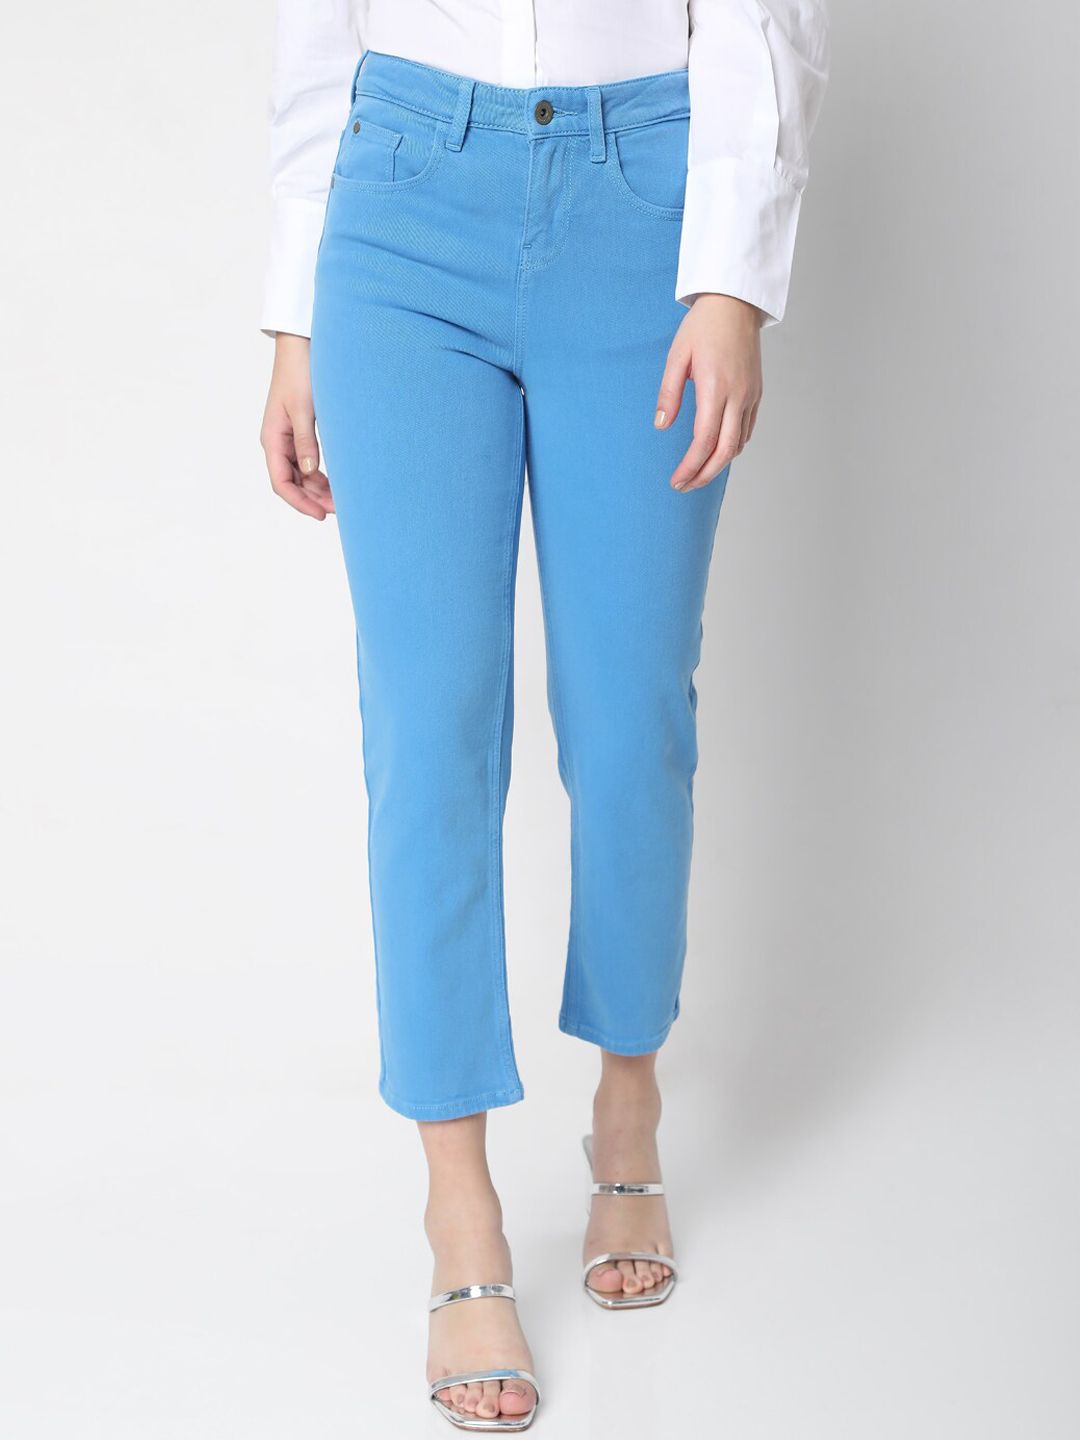 Vero Moda Women Blue High-Rise Highly Distressed Stretchable Jeans Price in India